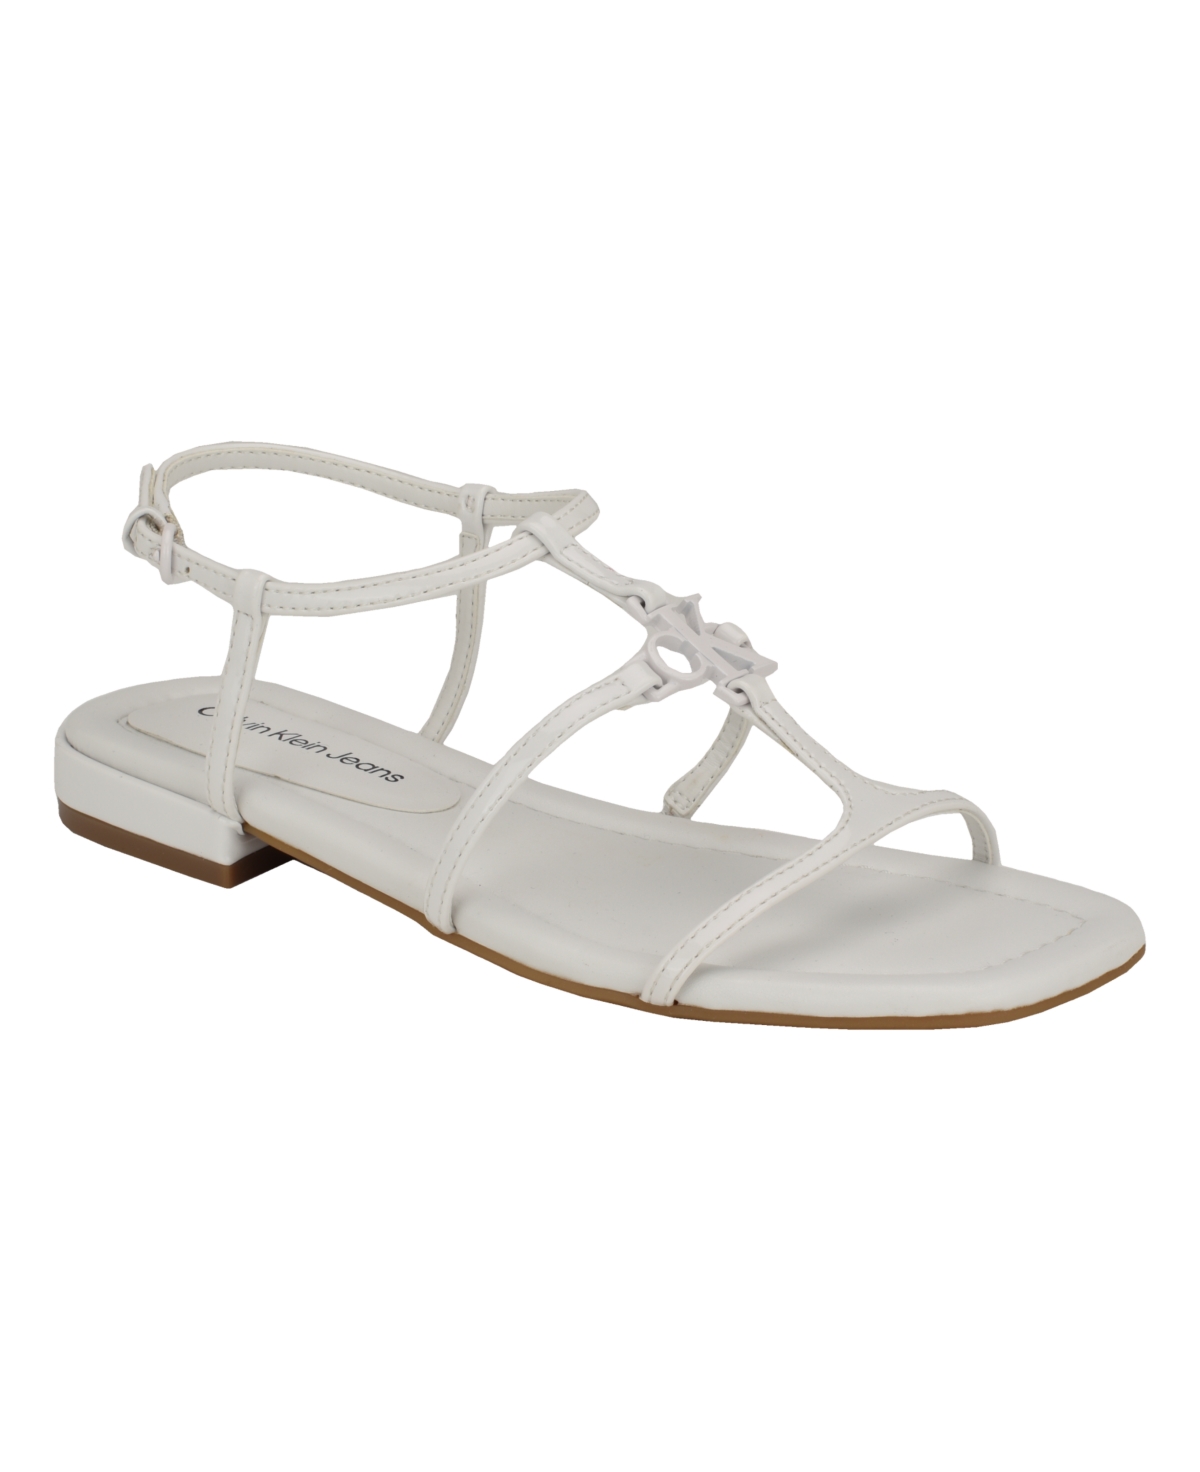 Calvin Klein Women's Sindy Square Toe Strappy Flat Sandals In White Patent - Faux Patent Leather - Pol